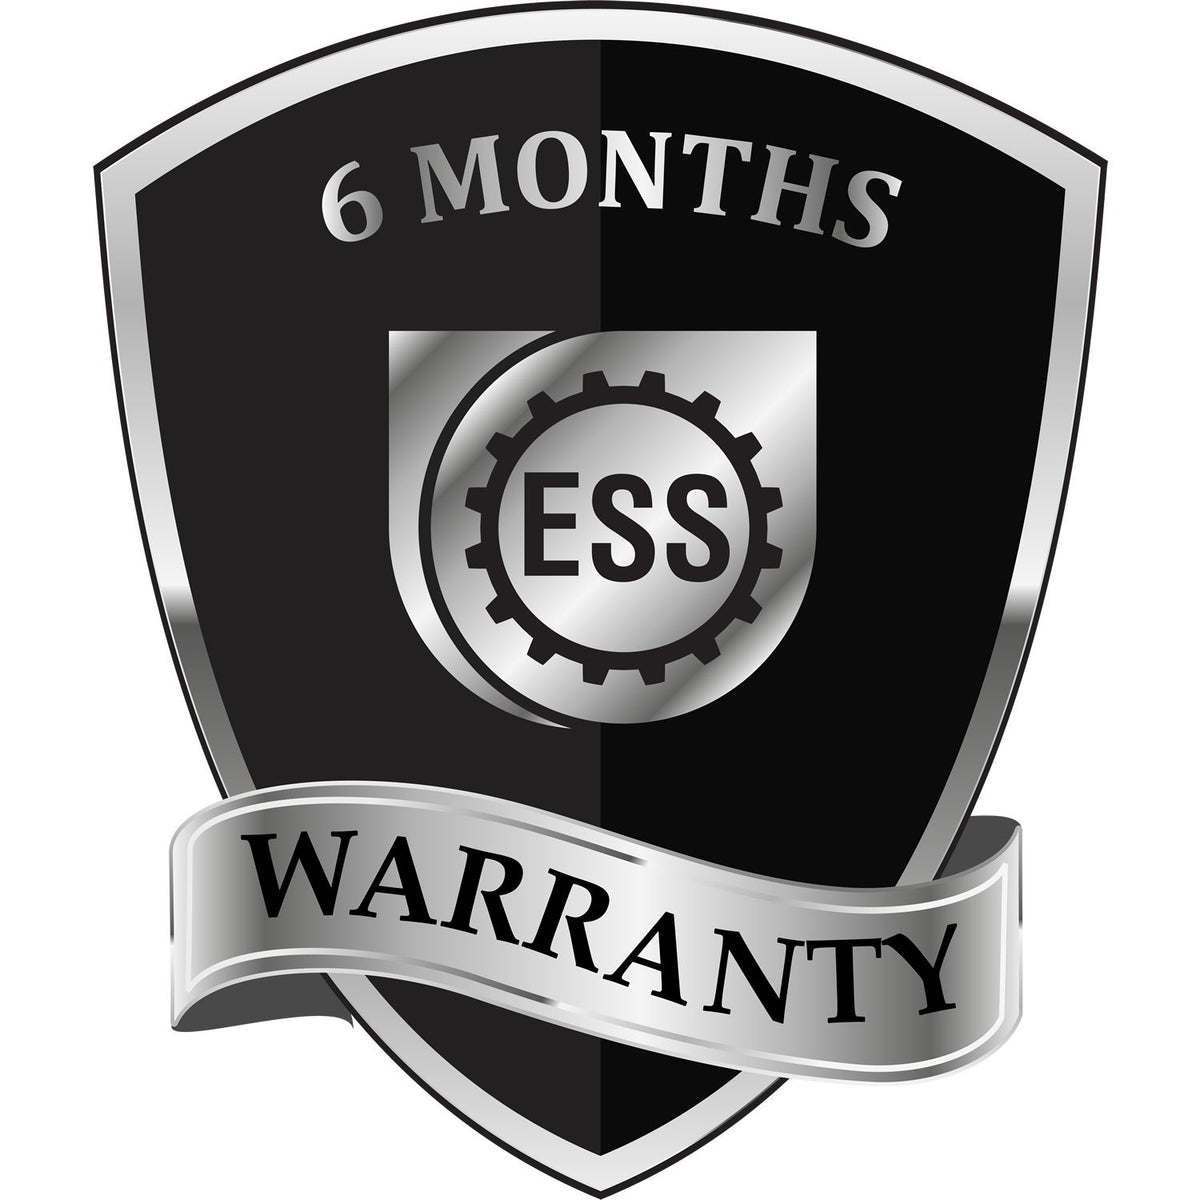 A badge or emblem showing a warranty icon for the PSI Colorado Notary Stamp